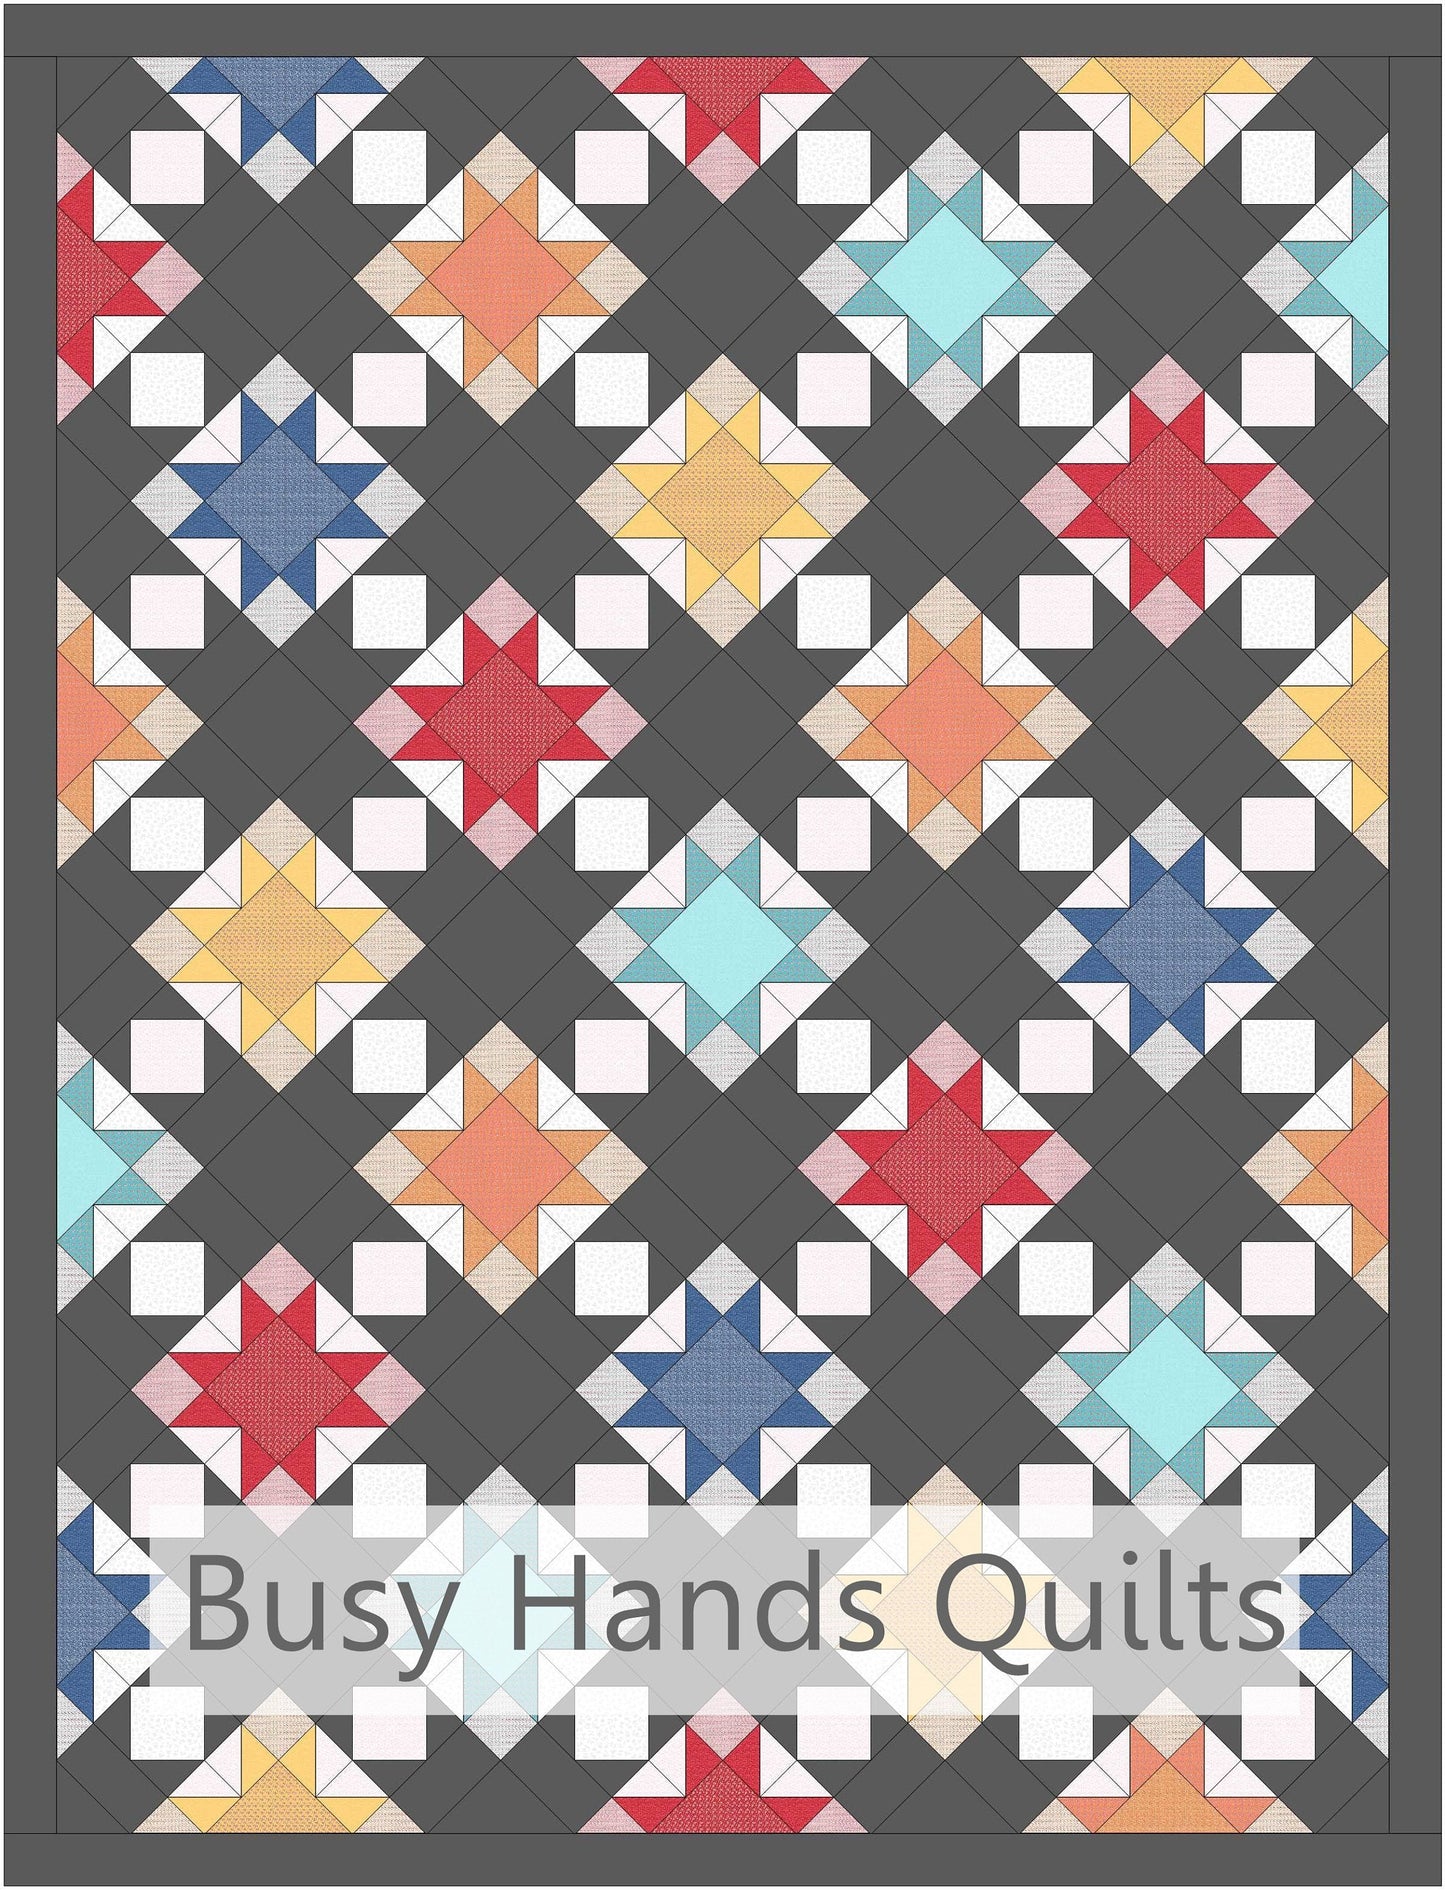 Night Sky Quilt Pattern PDF DOWNLOAD Busy Hands Quilts $12.99